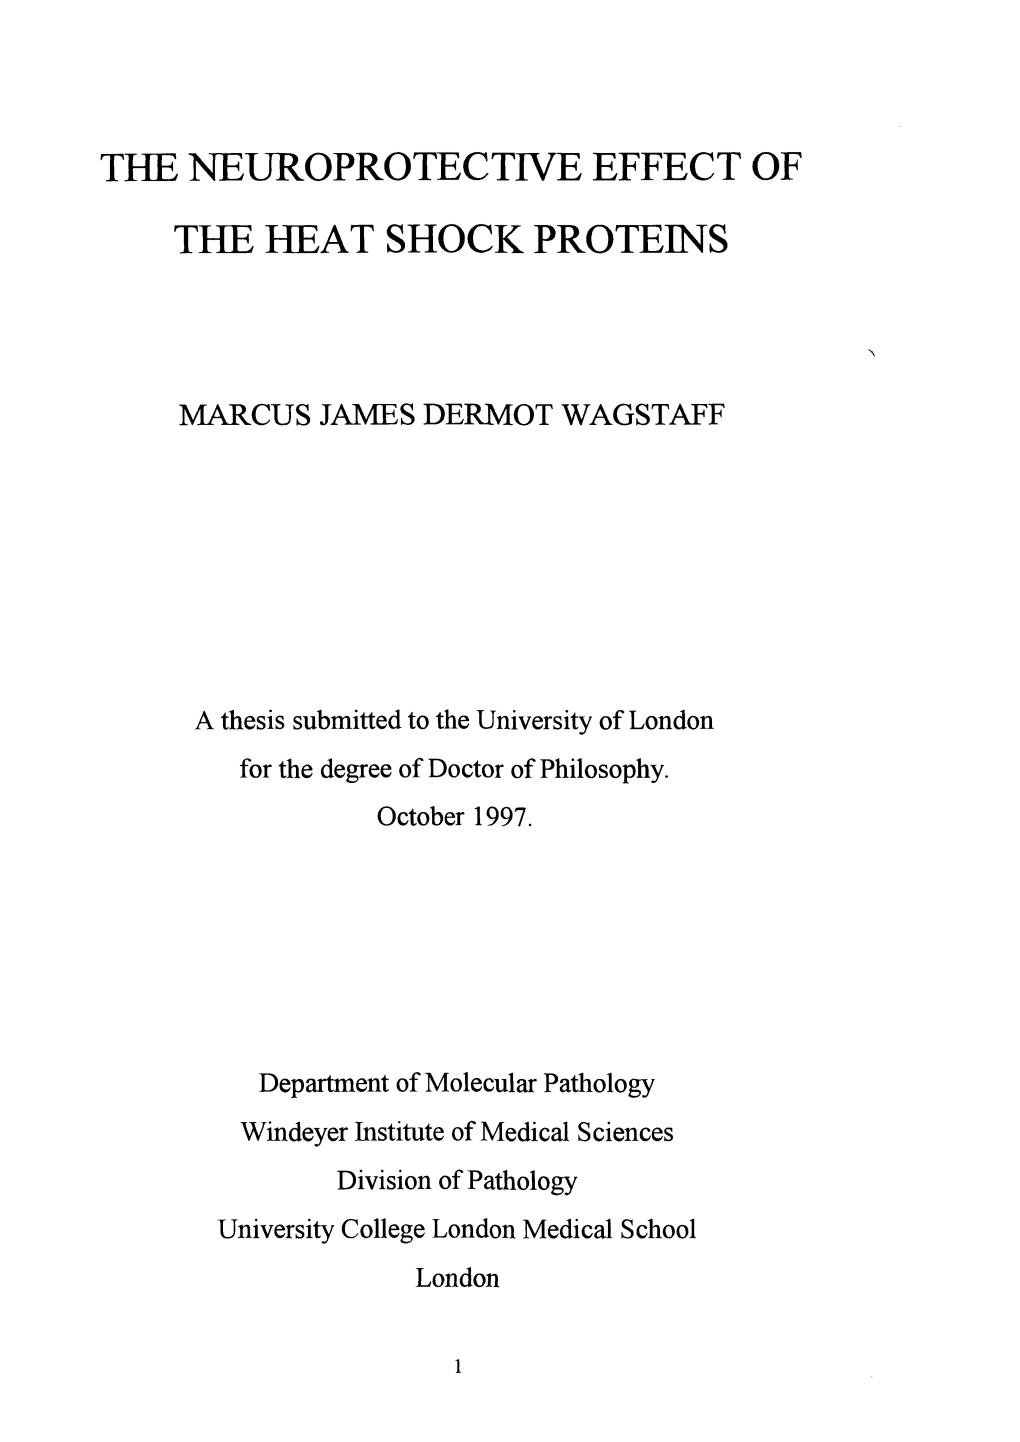 The Neuroprotective Effect of the Heat Shock Proteins